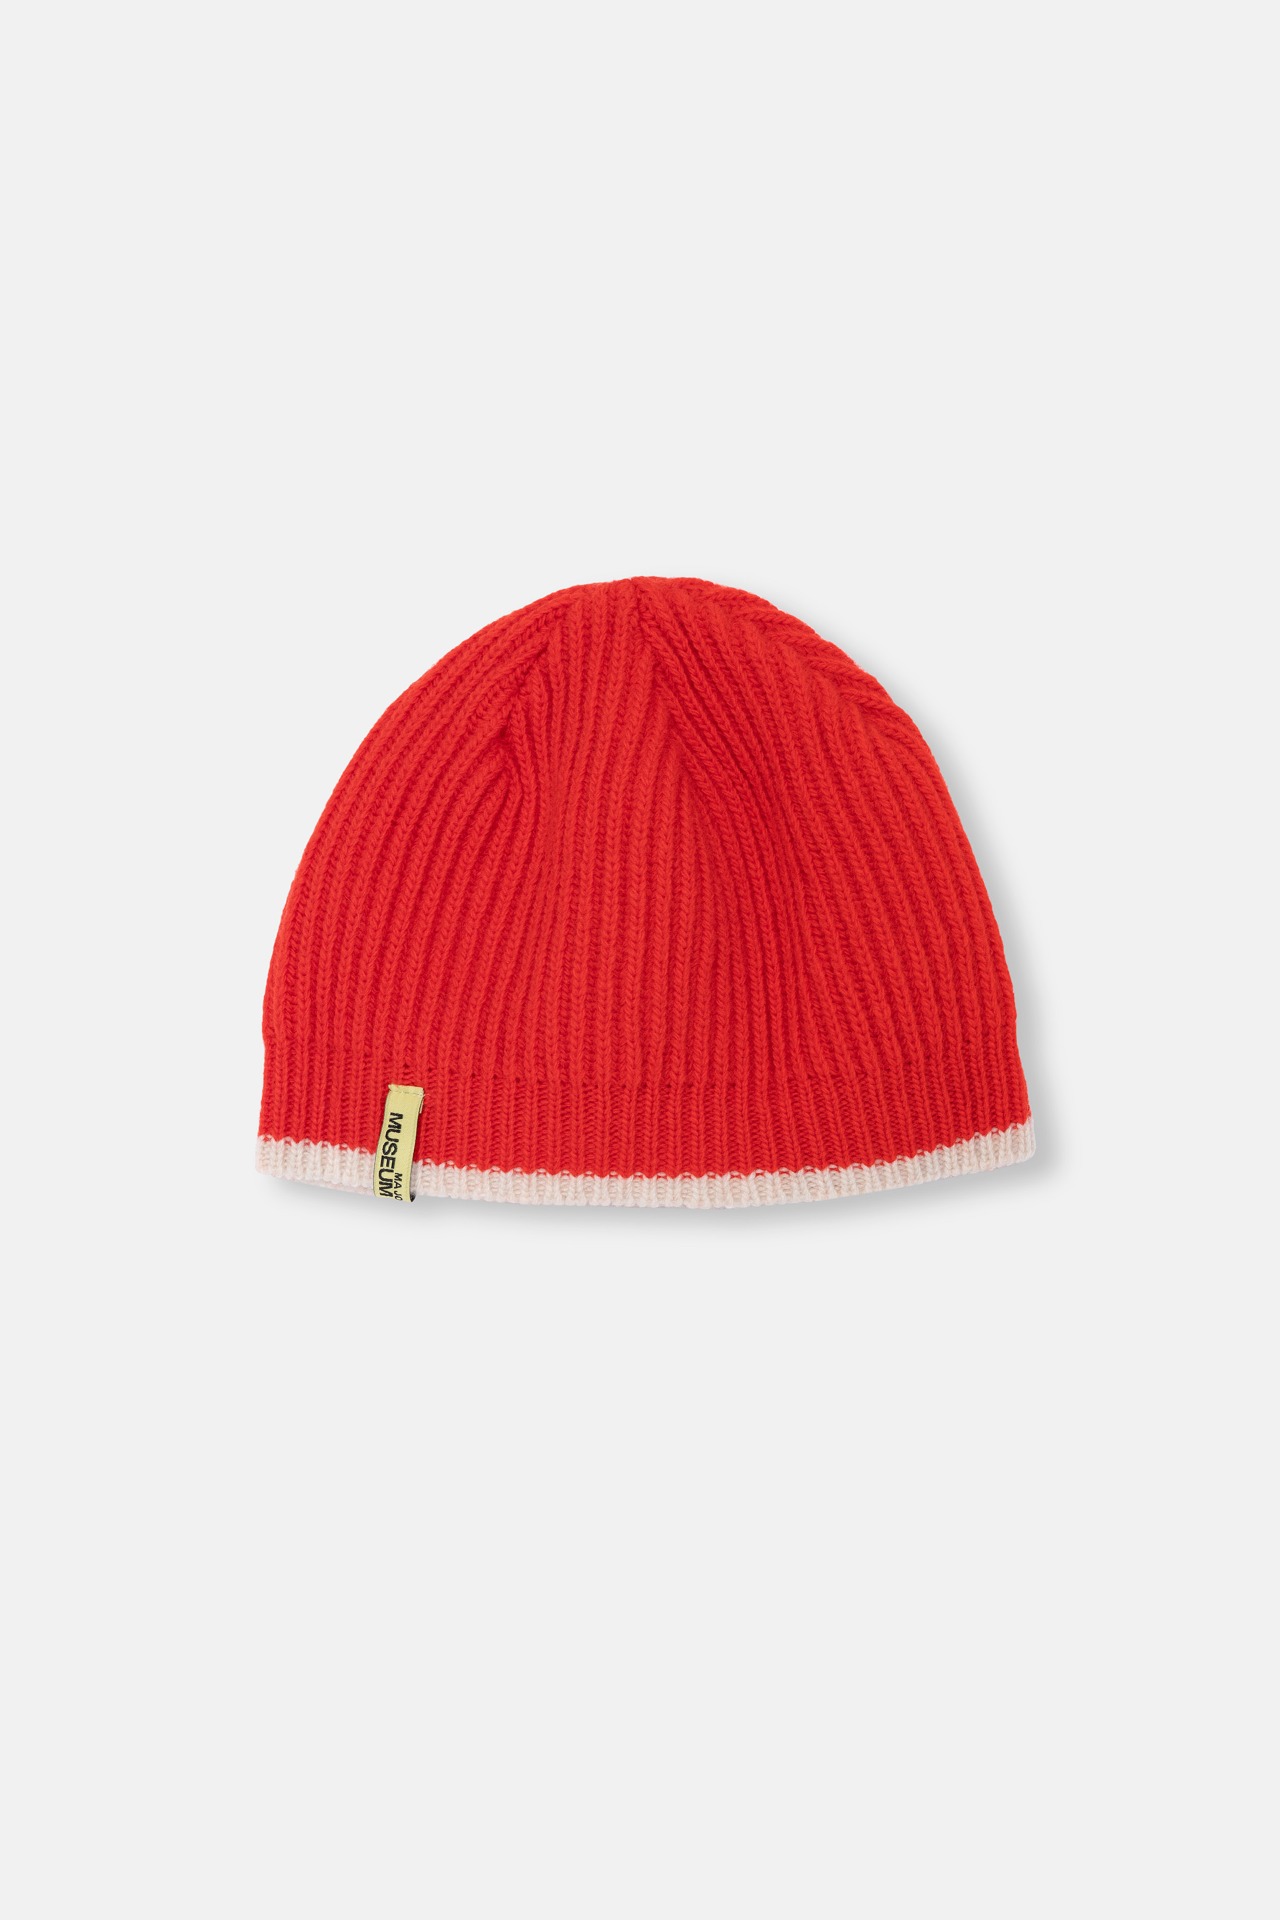 CASHMERE BLEND KNIT BEANIE_RED